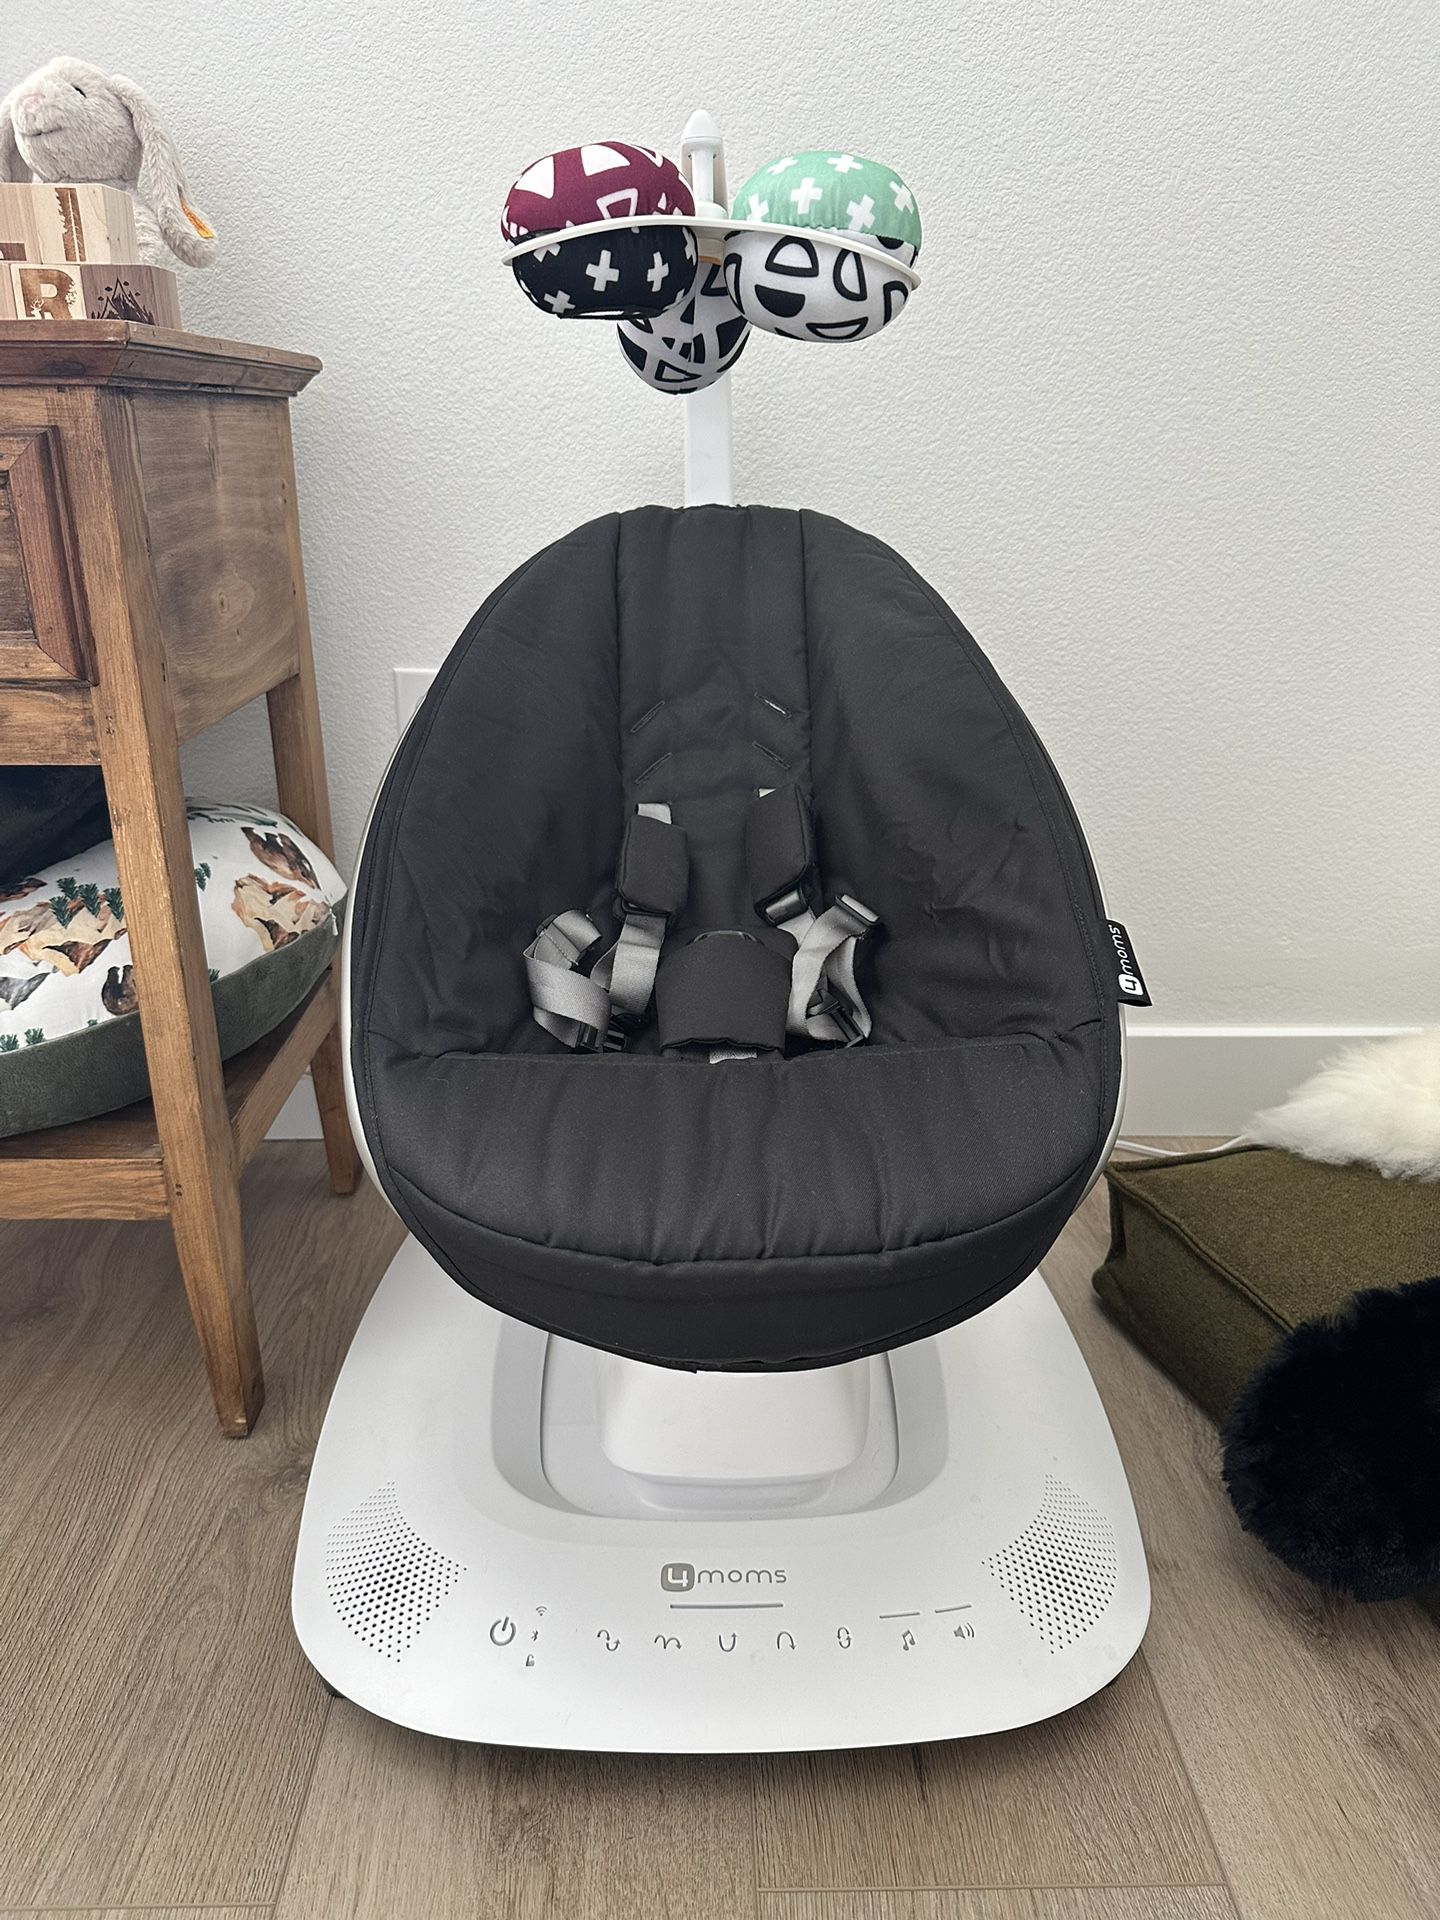 MamaRoo Multi-Motion Baby Swing - Perfect Condition - Black